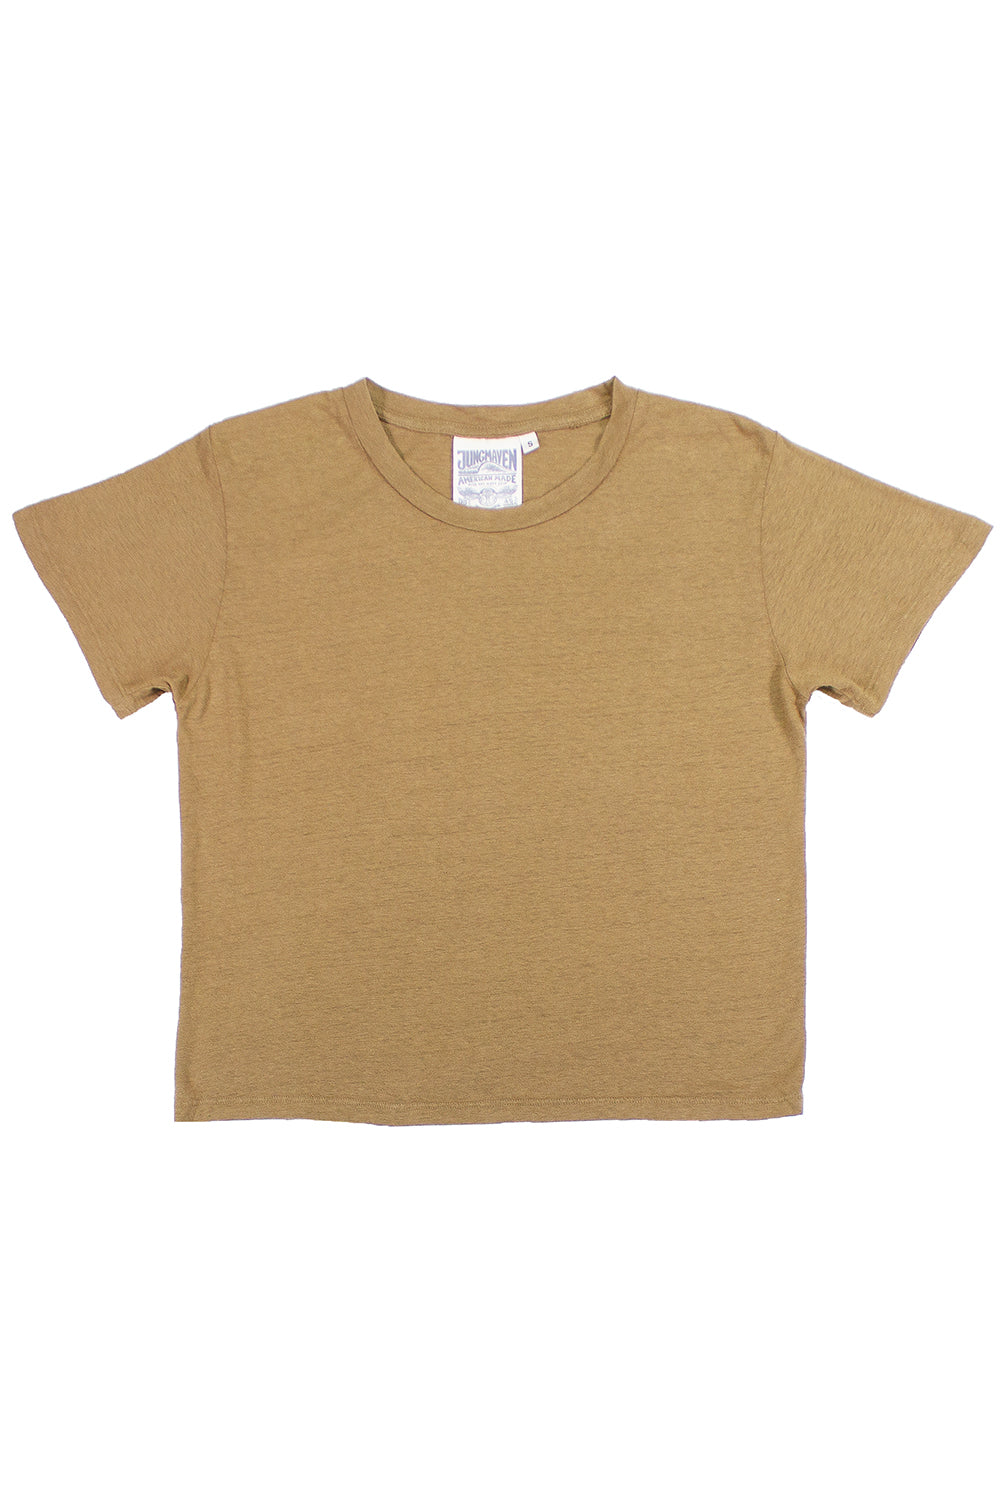 Cropped Lorel Tee | Jungmaven Hemp Clothing & Accessories / Color: Coyote